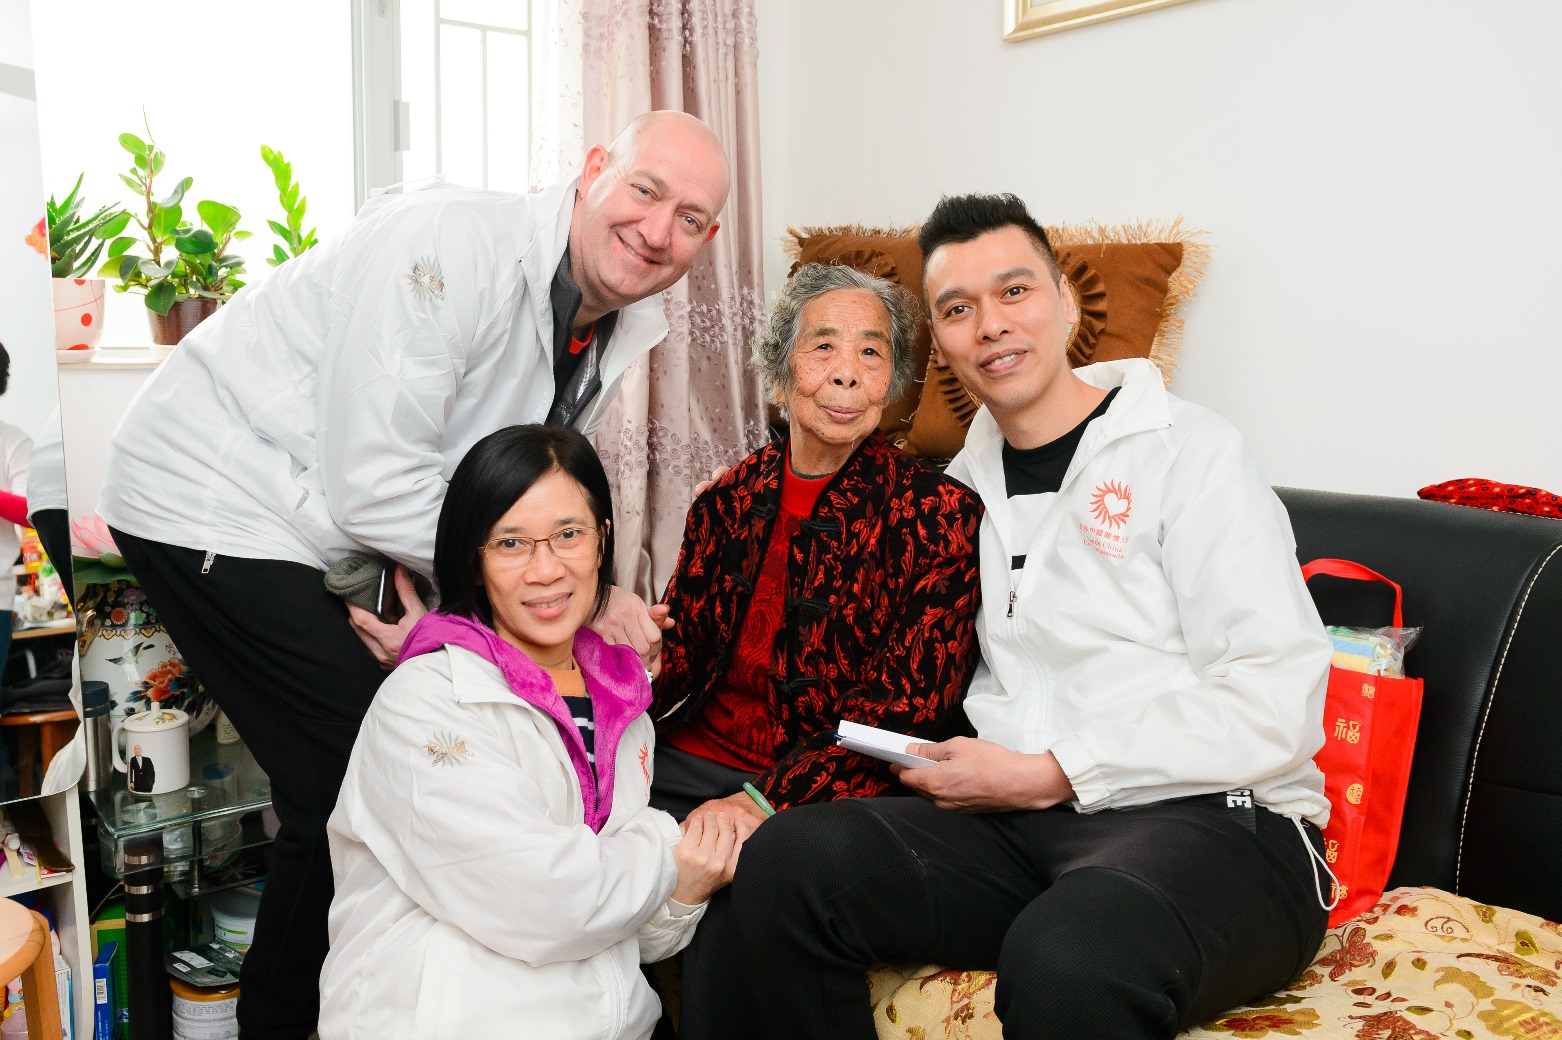 Sands China Does Annual Spring Cleaning with Macao Elderly